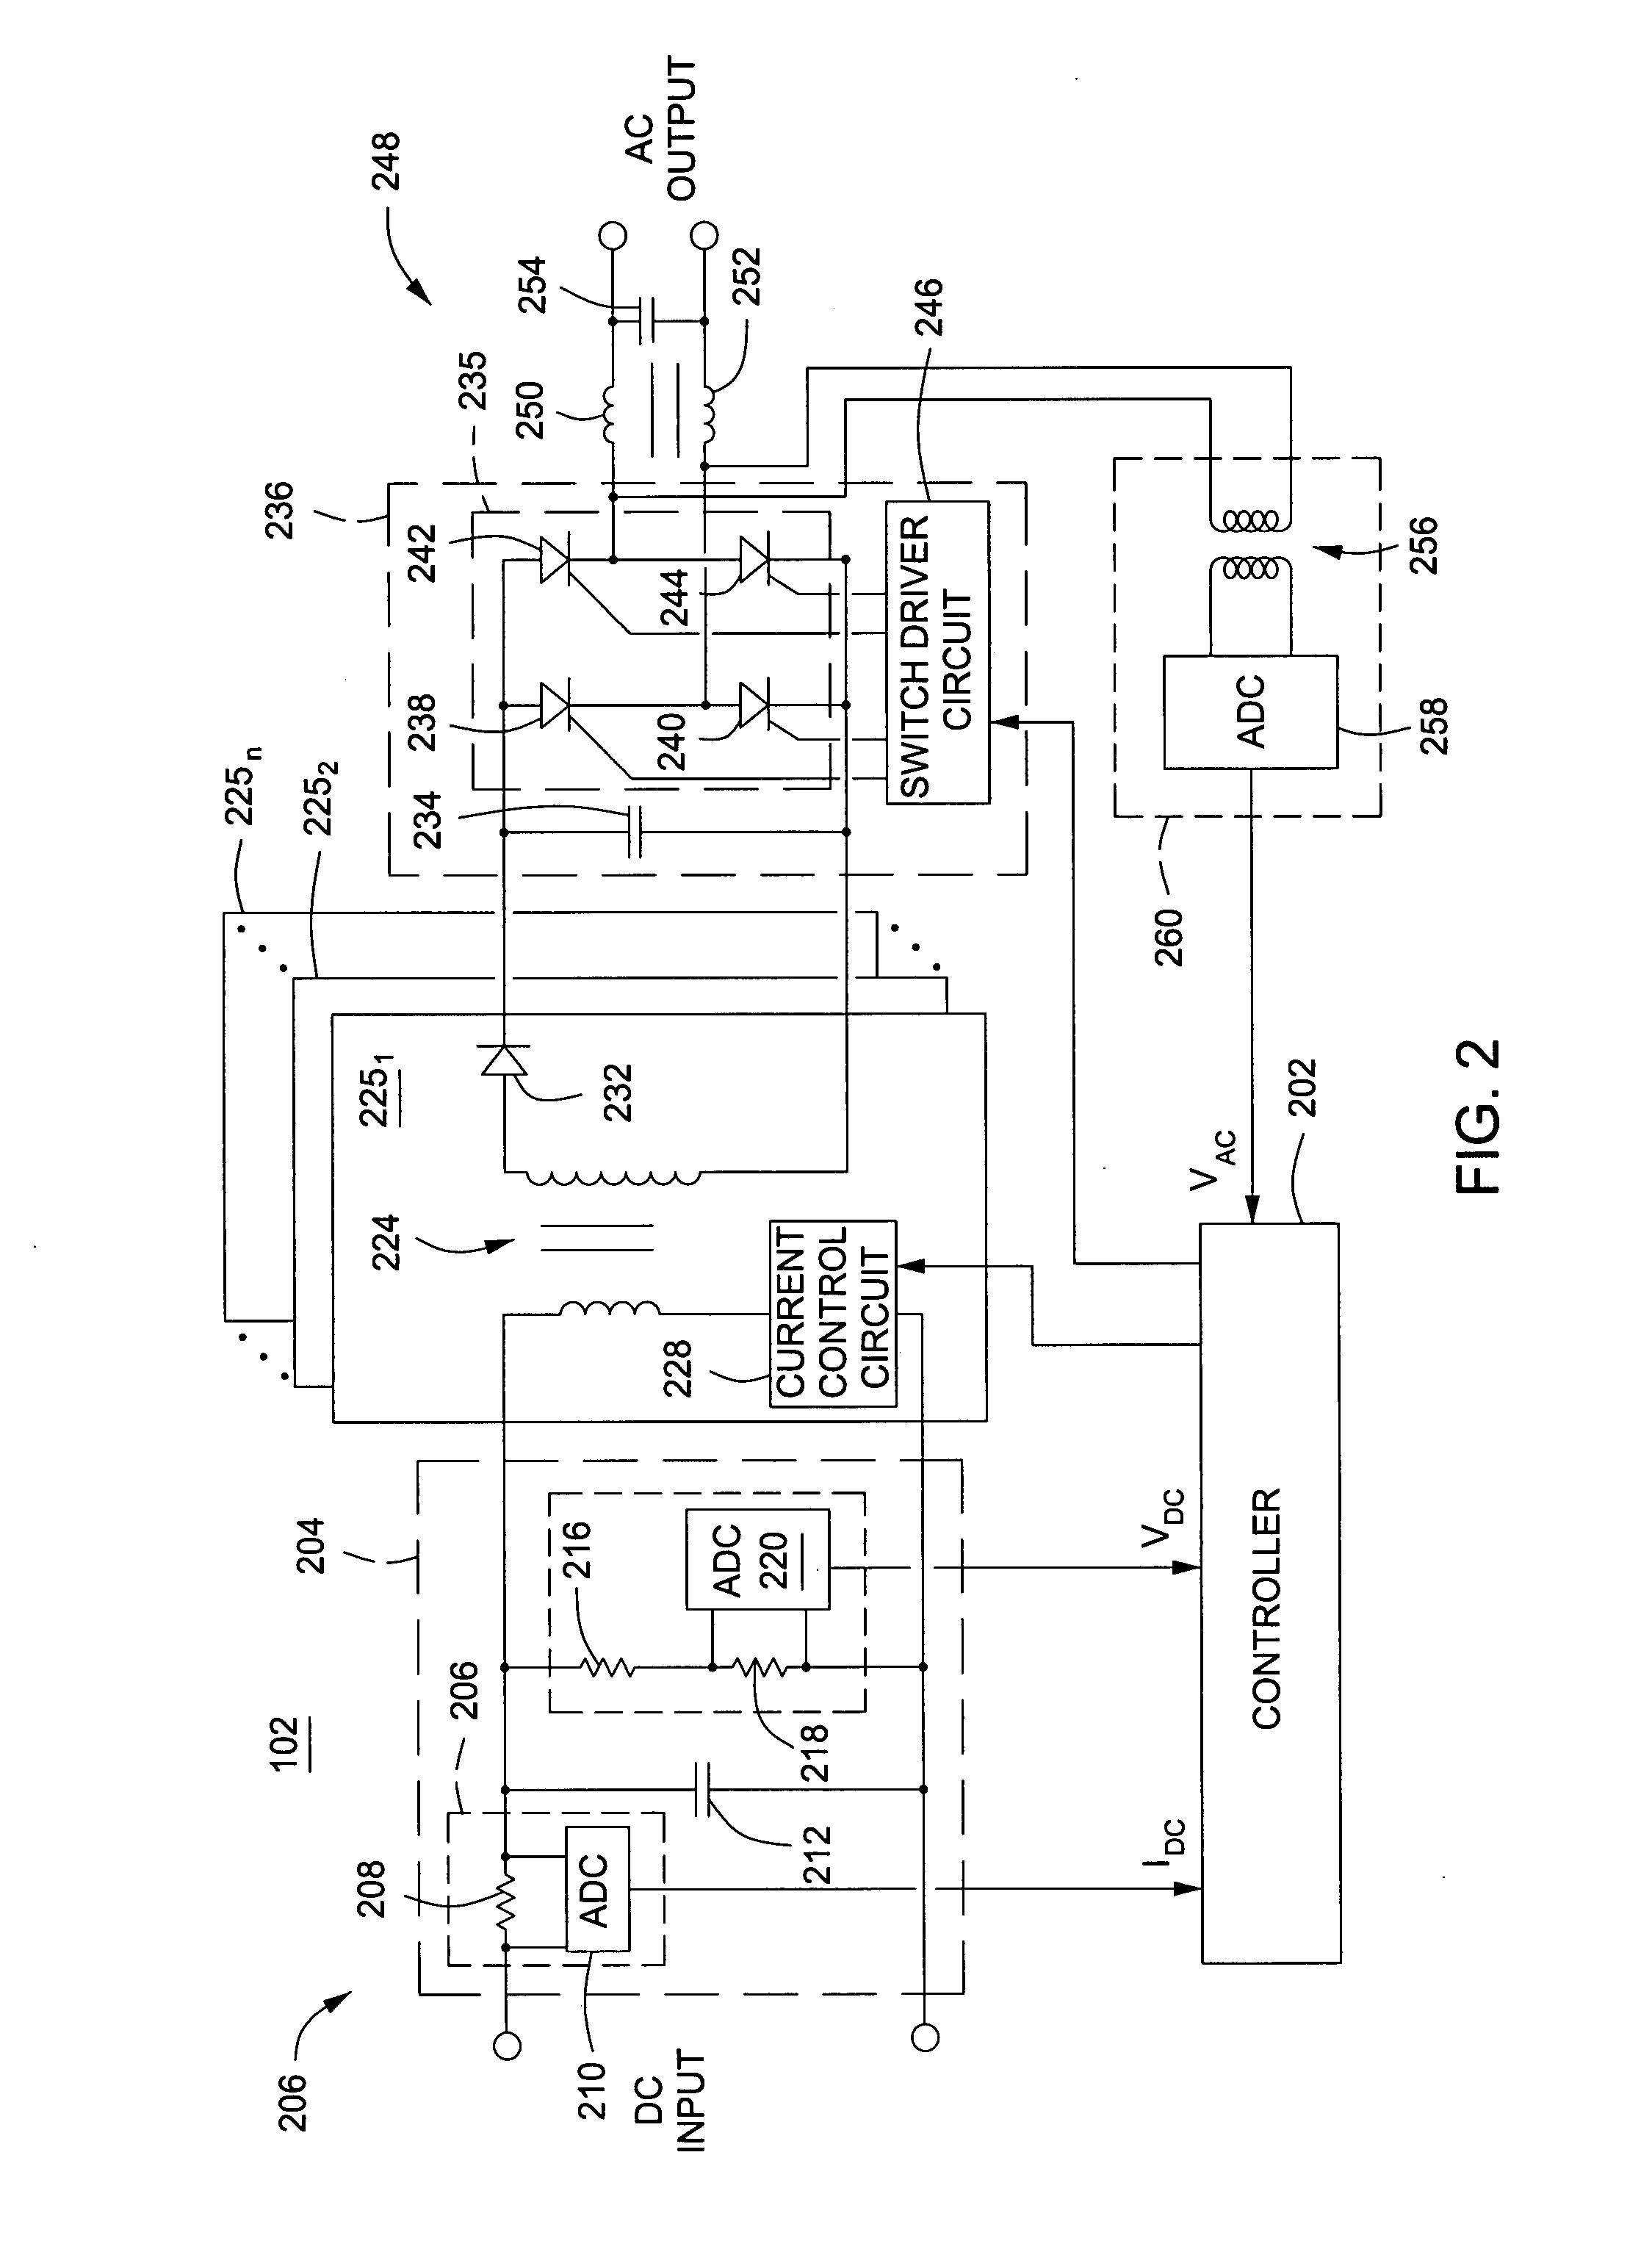 Method and apparatus for converting direct current to alternating current